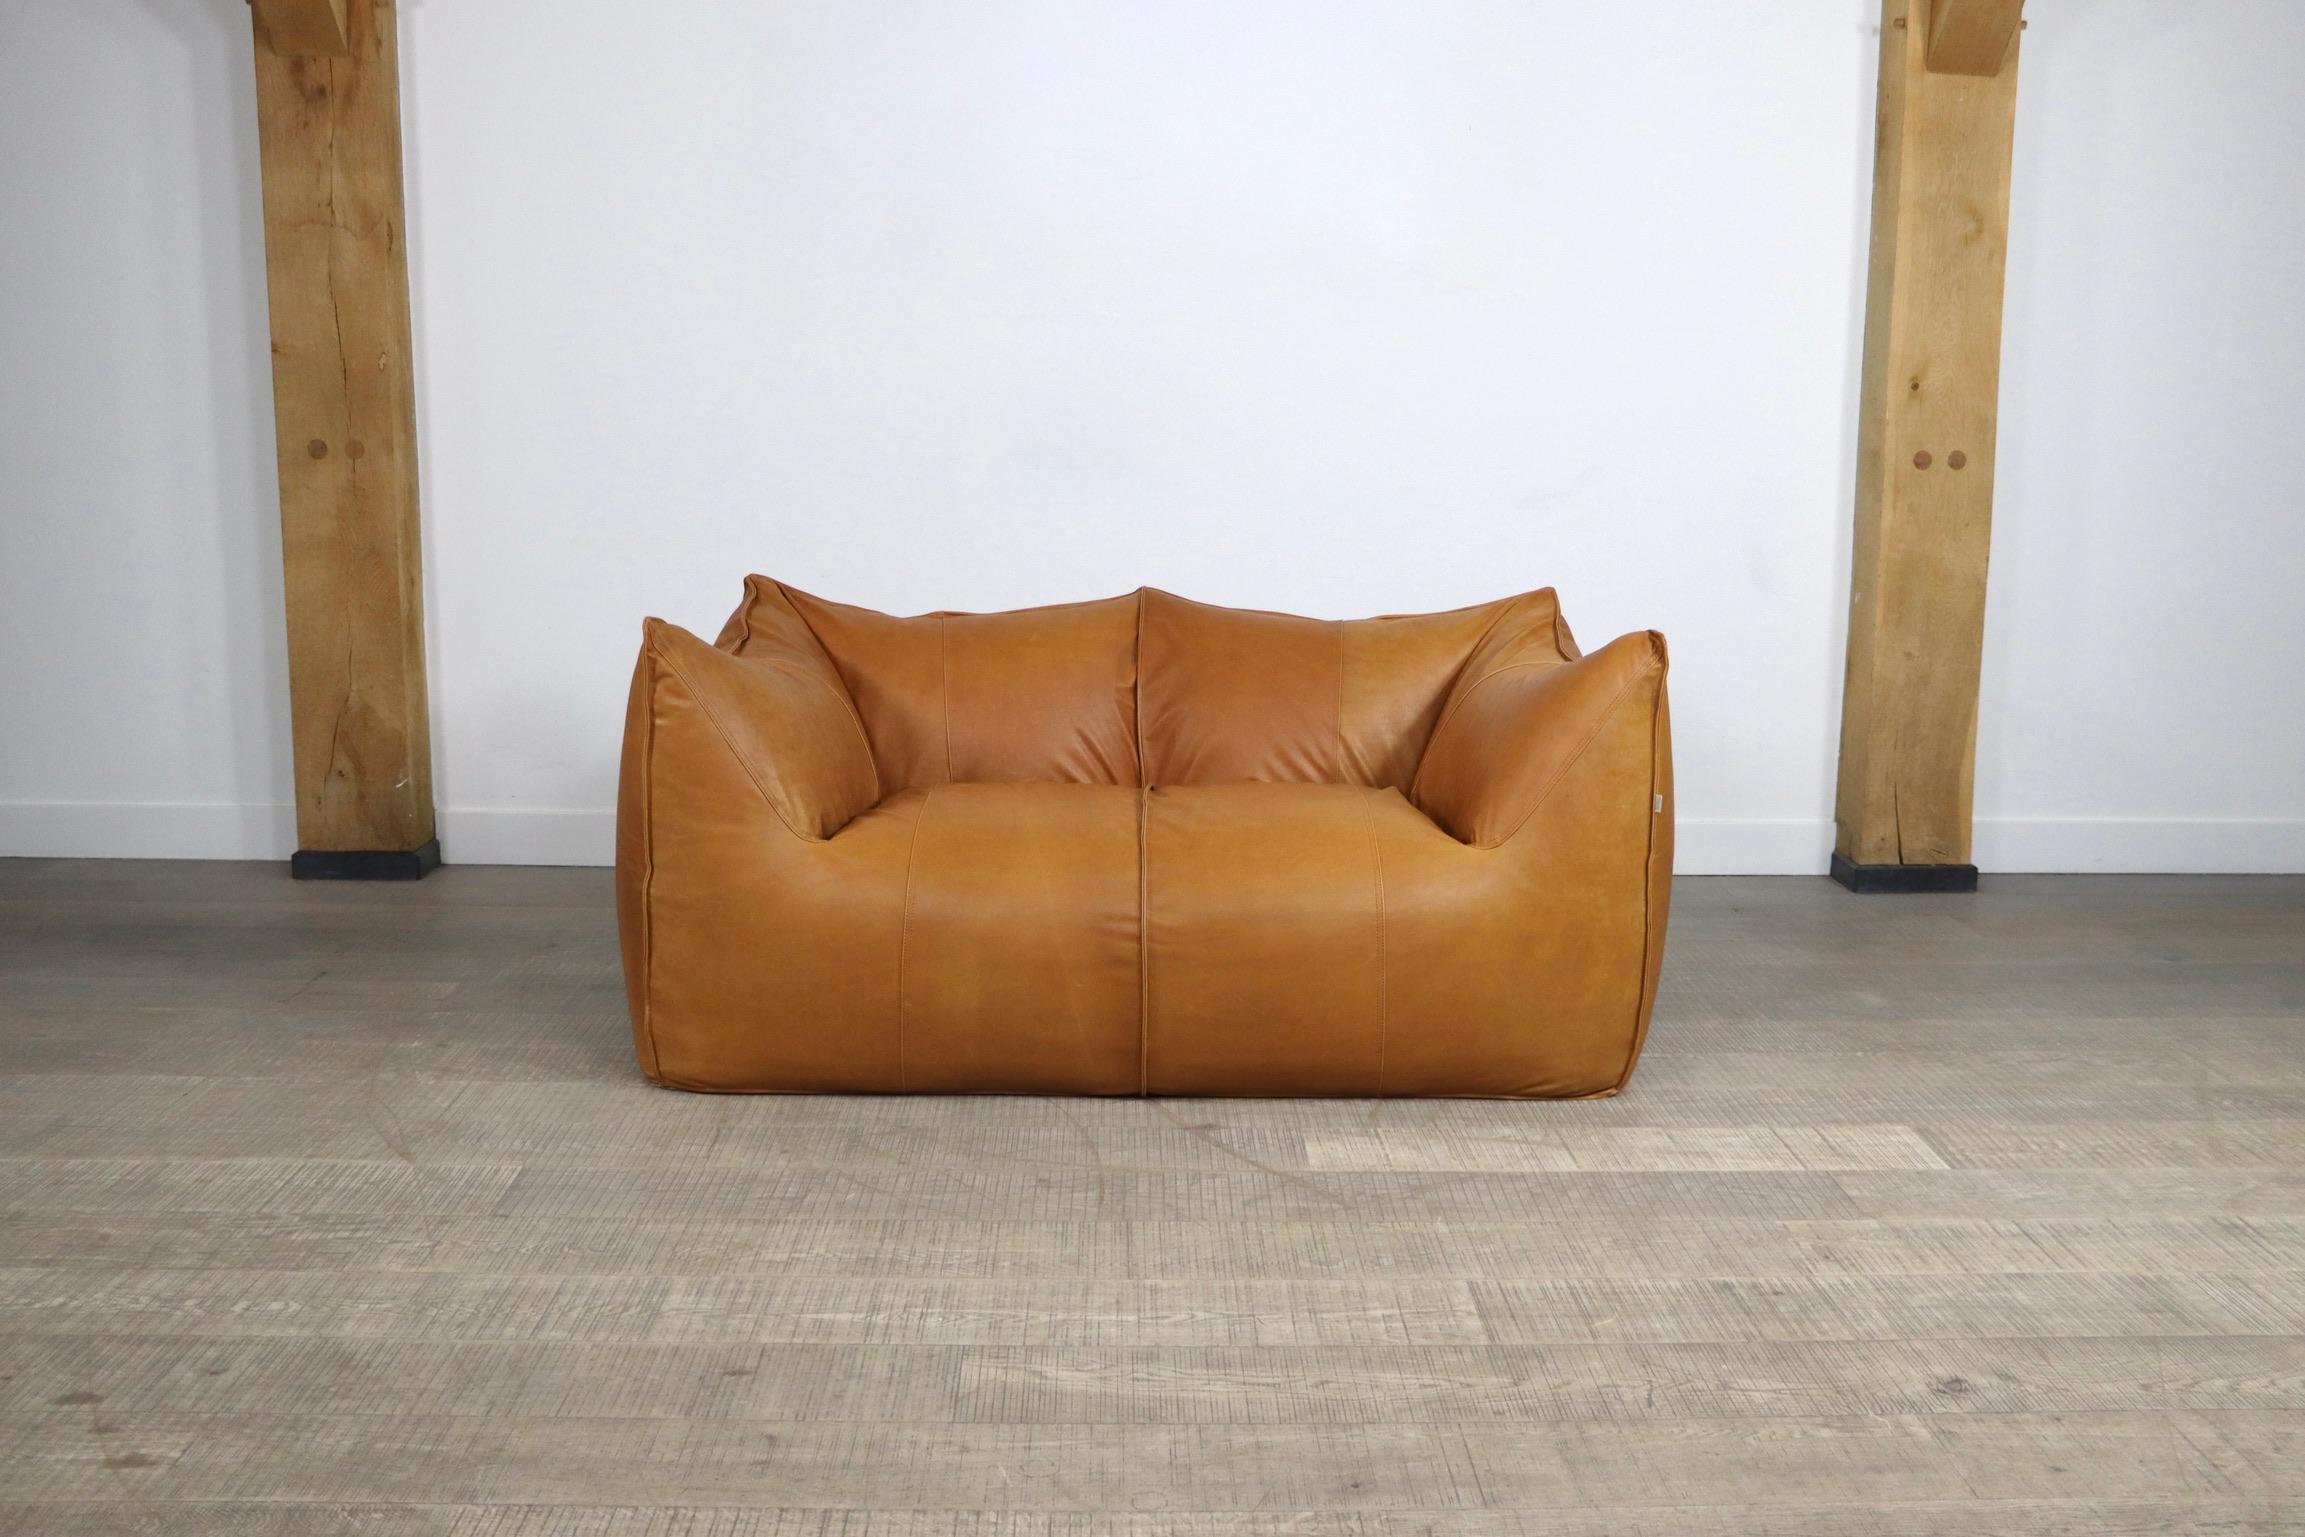 Stunning “Le Bambole” two seater sofa designed by Mario Bellini for B & B Italia in the 1970s. A beautiful edition in cognac leather. Besides the outstanding comfort this iconic sofa is famous for its timeless looks. 

Dimensions: W178 x D98 x H72